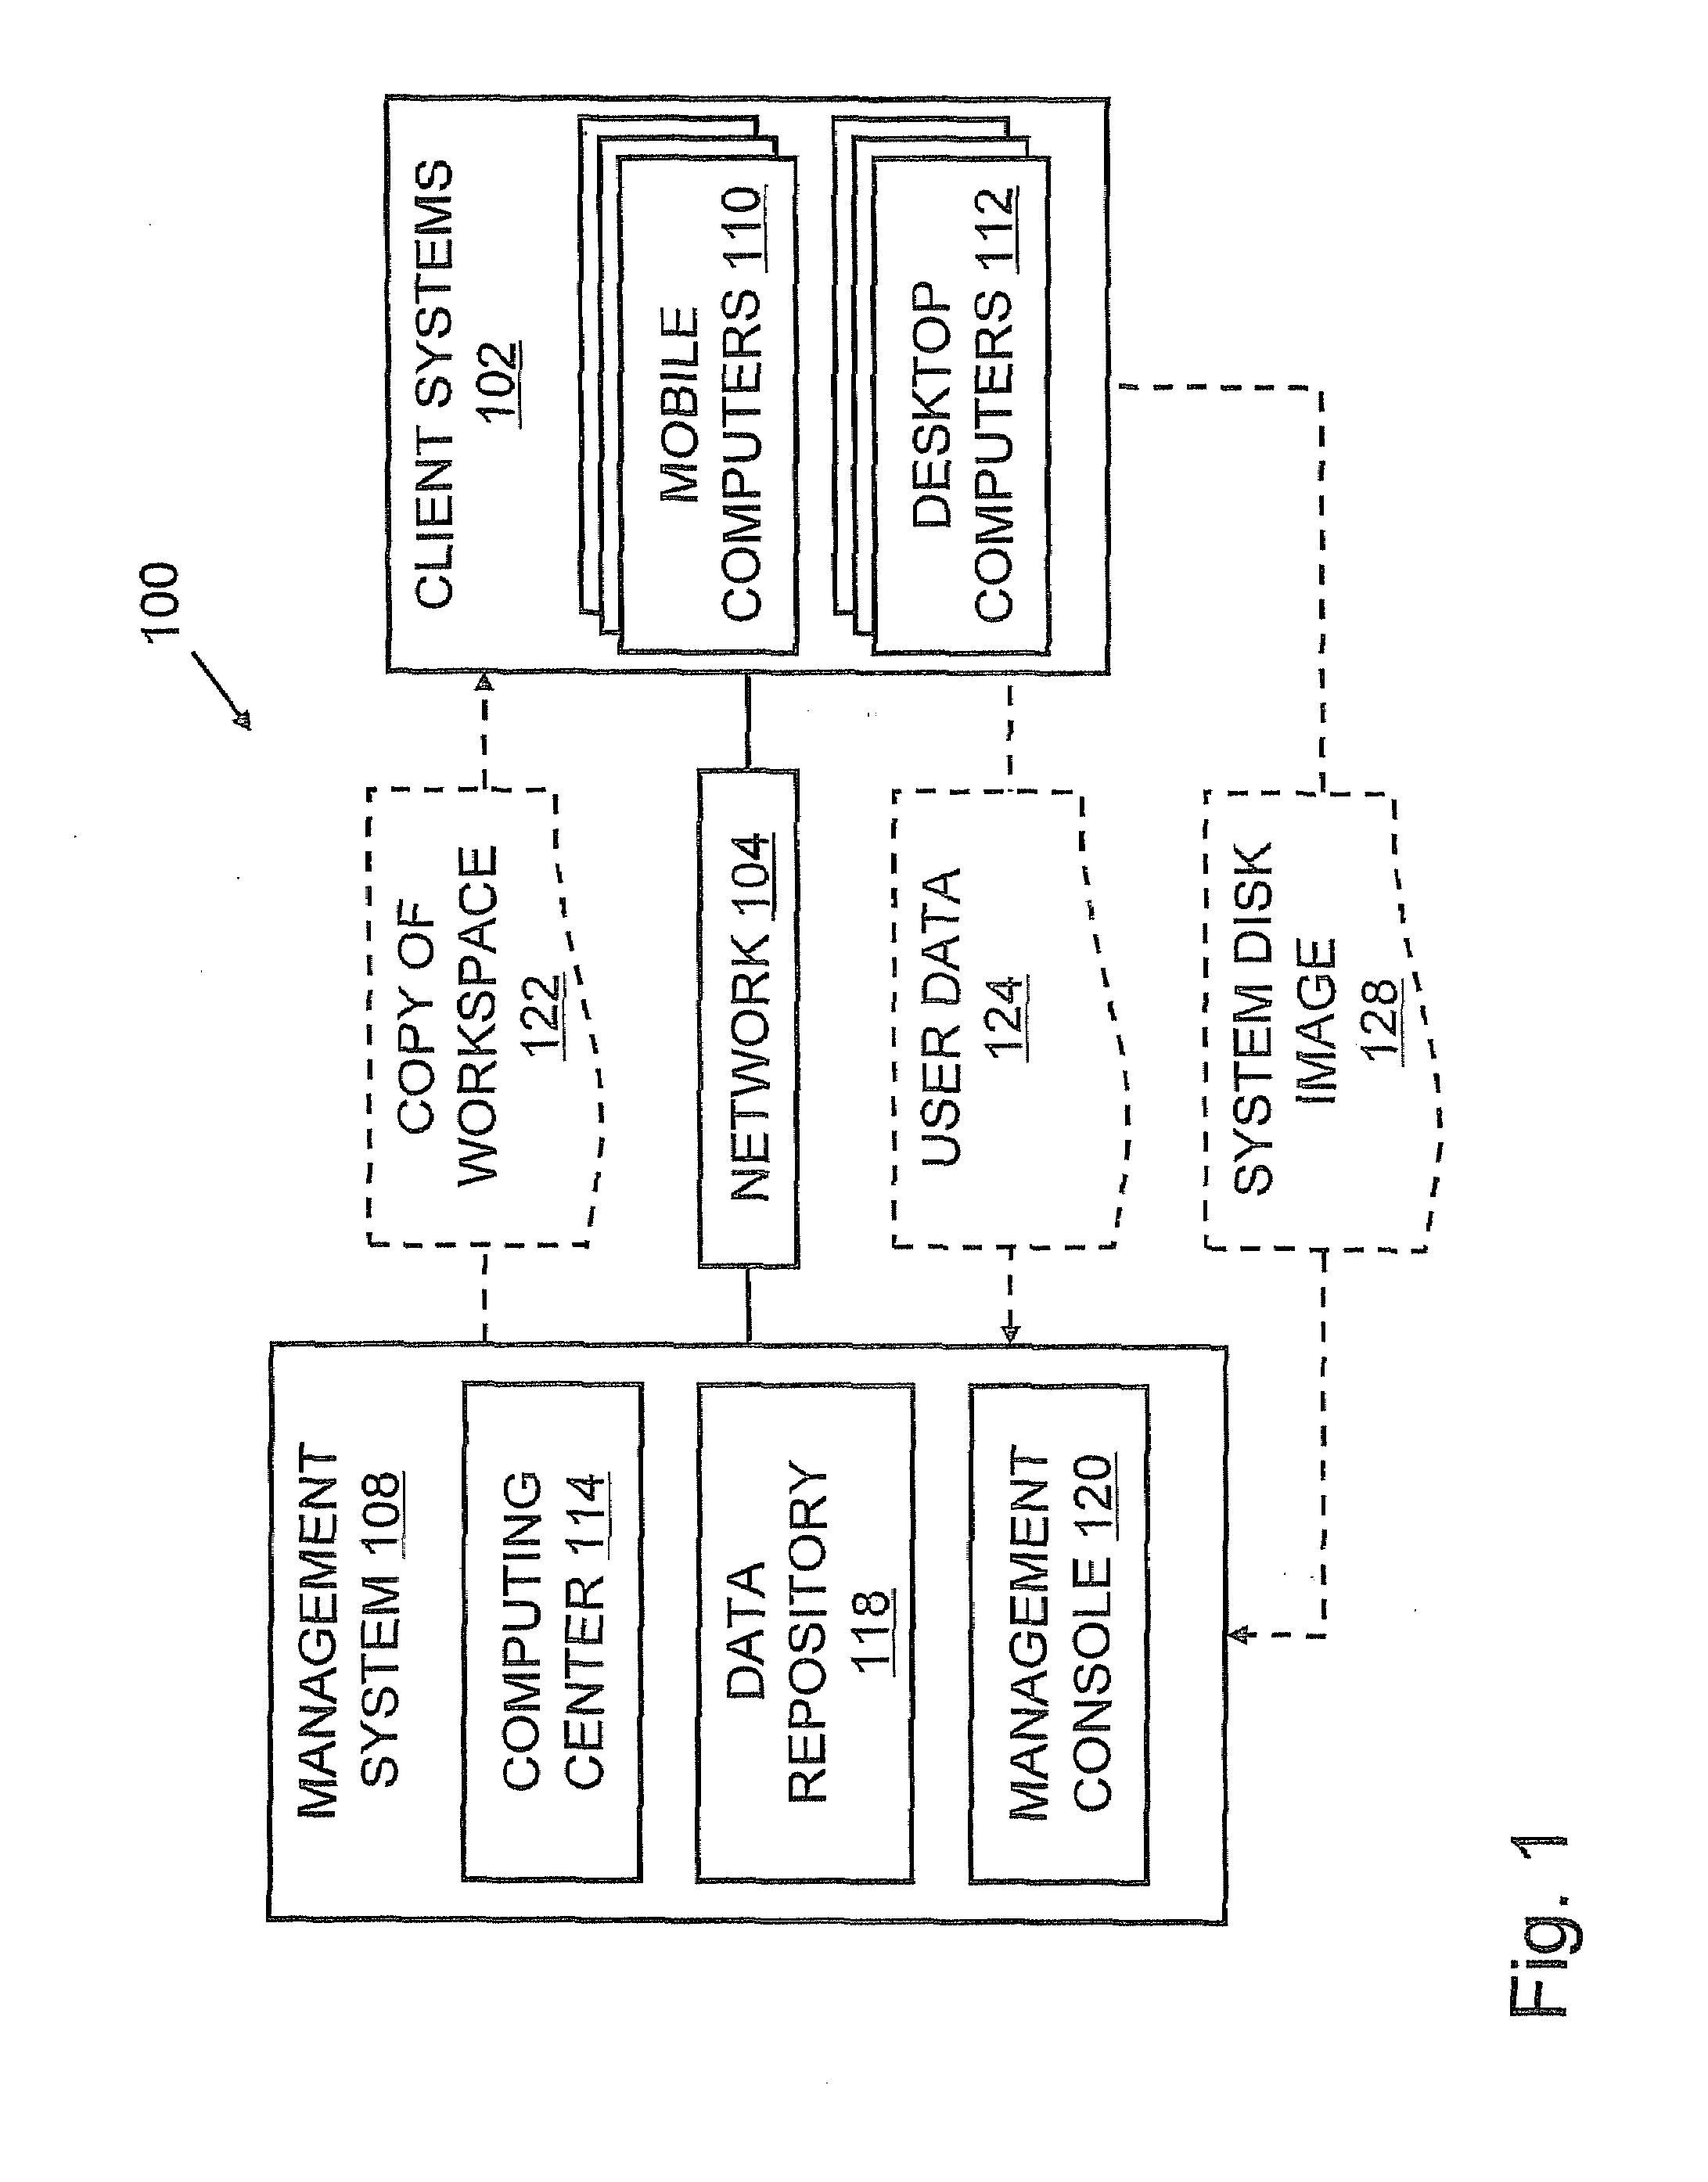 Backup to Provide Hardware Agnostic Access to a Virtual Workspace Using Multiple Virtualization Dimensions